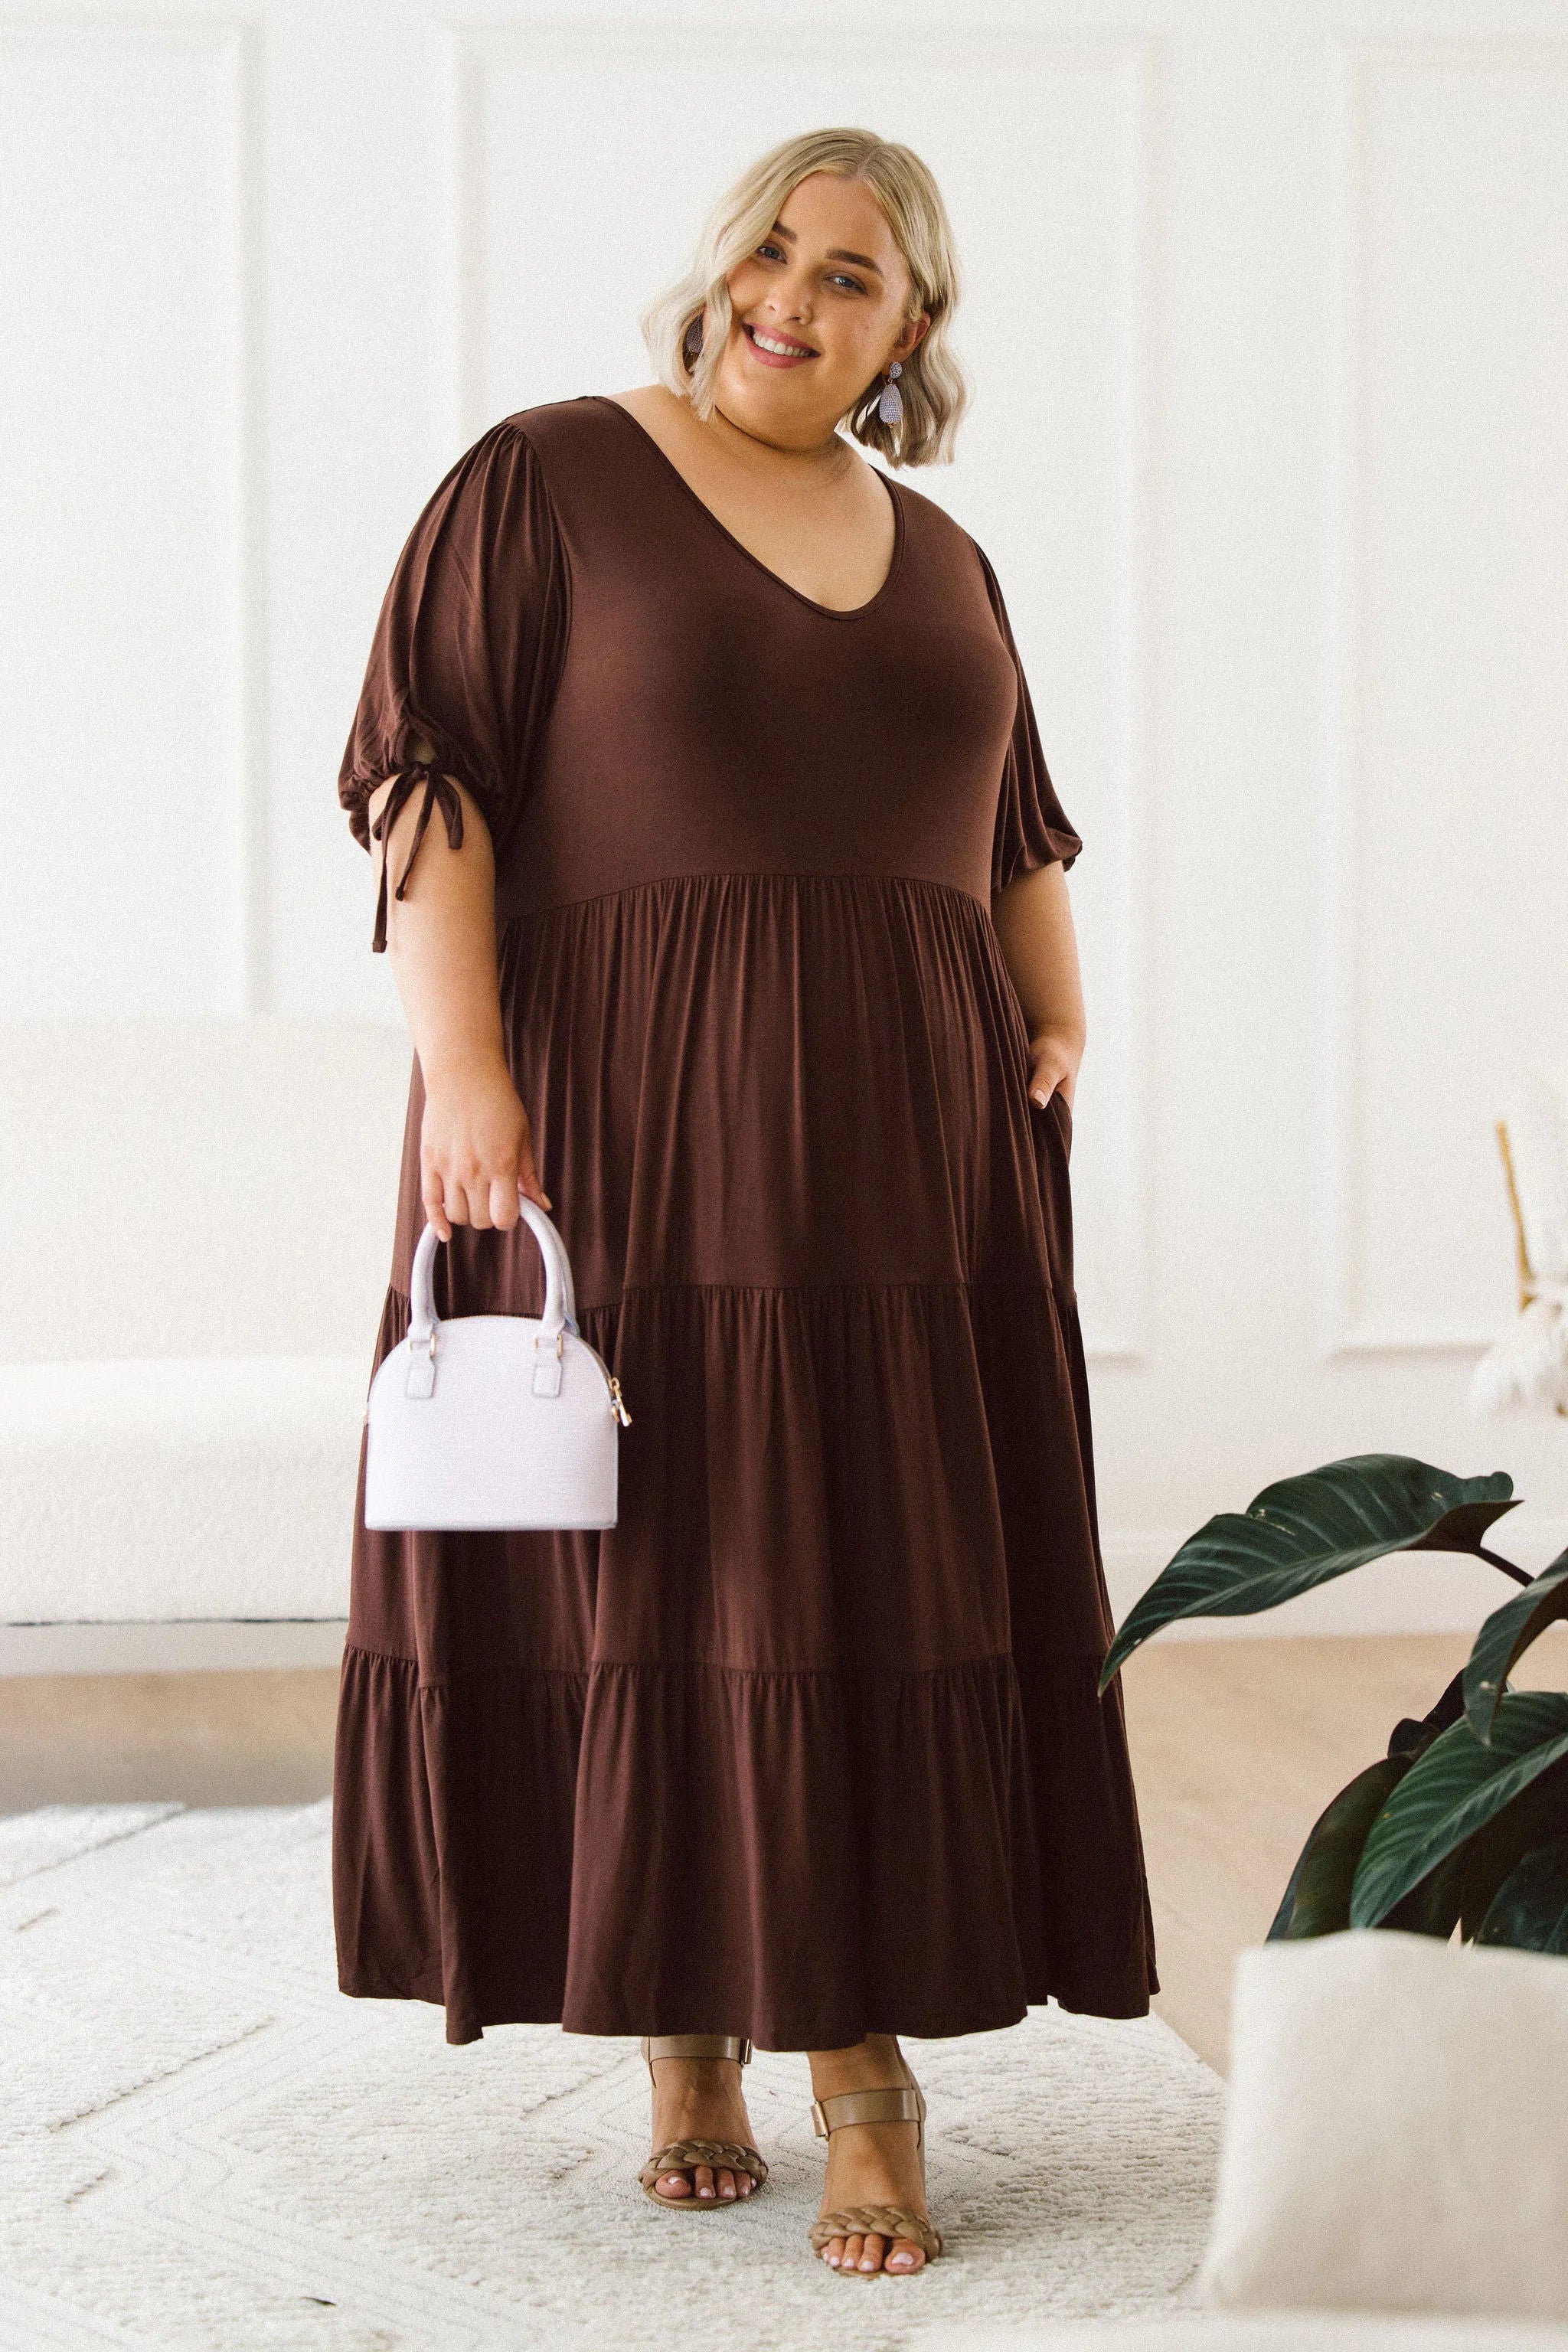 Model in elegant plus size brown dress - Harlow Dress in Chocolate by Peach The Label